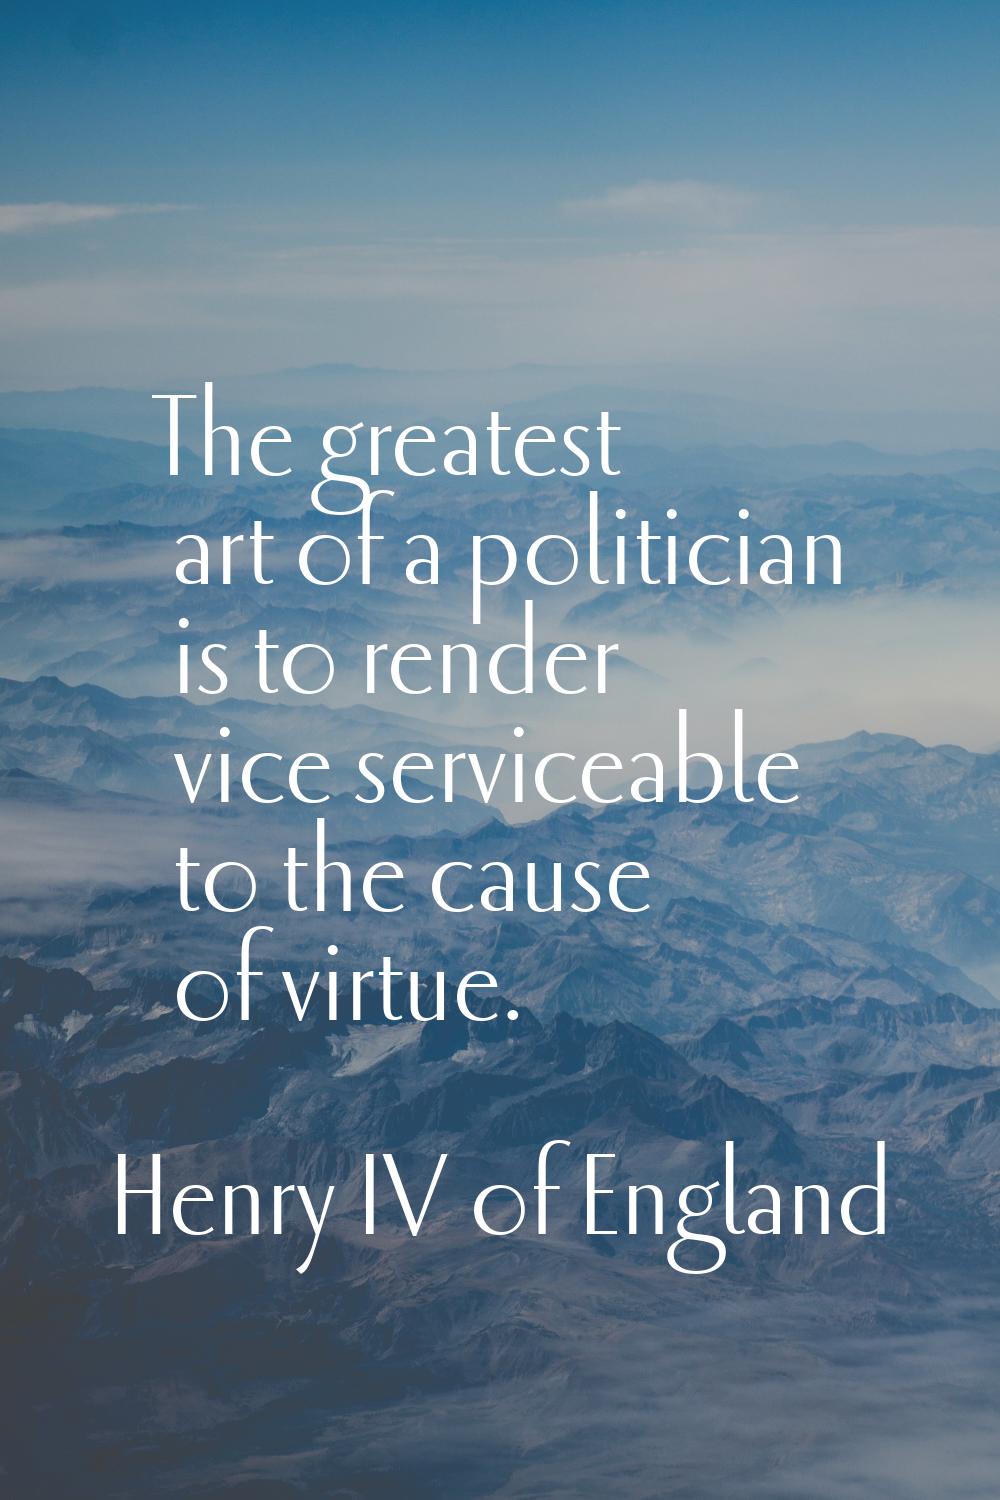 The greatest art of a politician is to render vice serviceable to the cause of virtue.